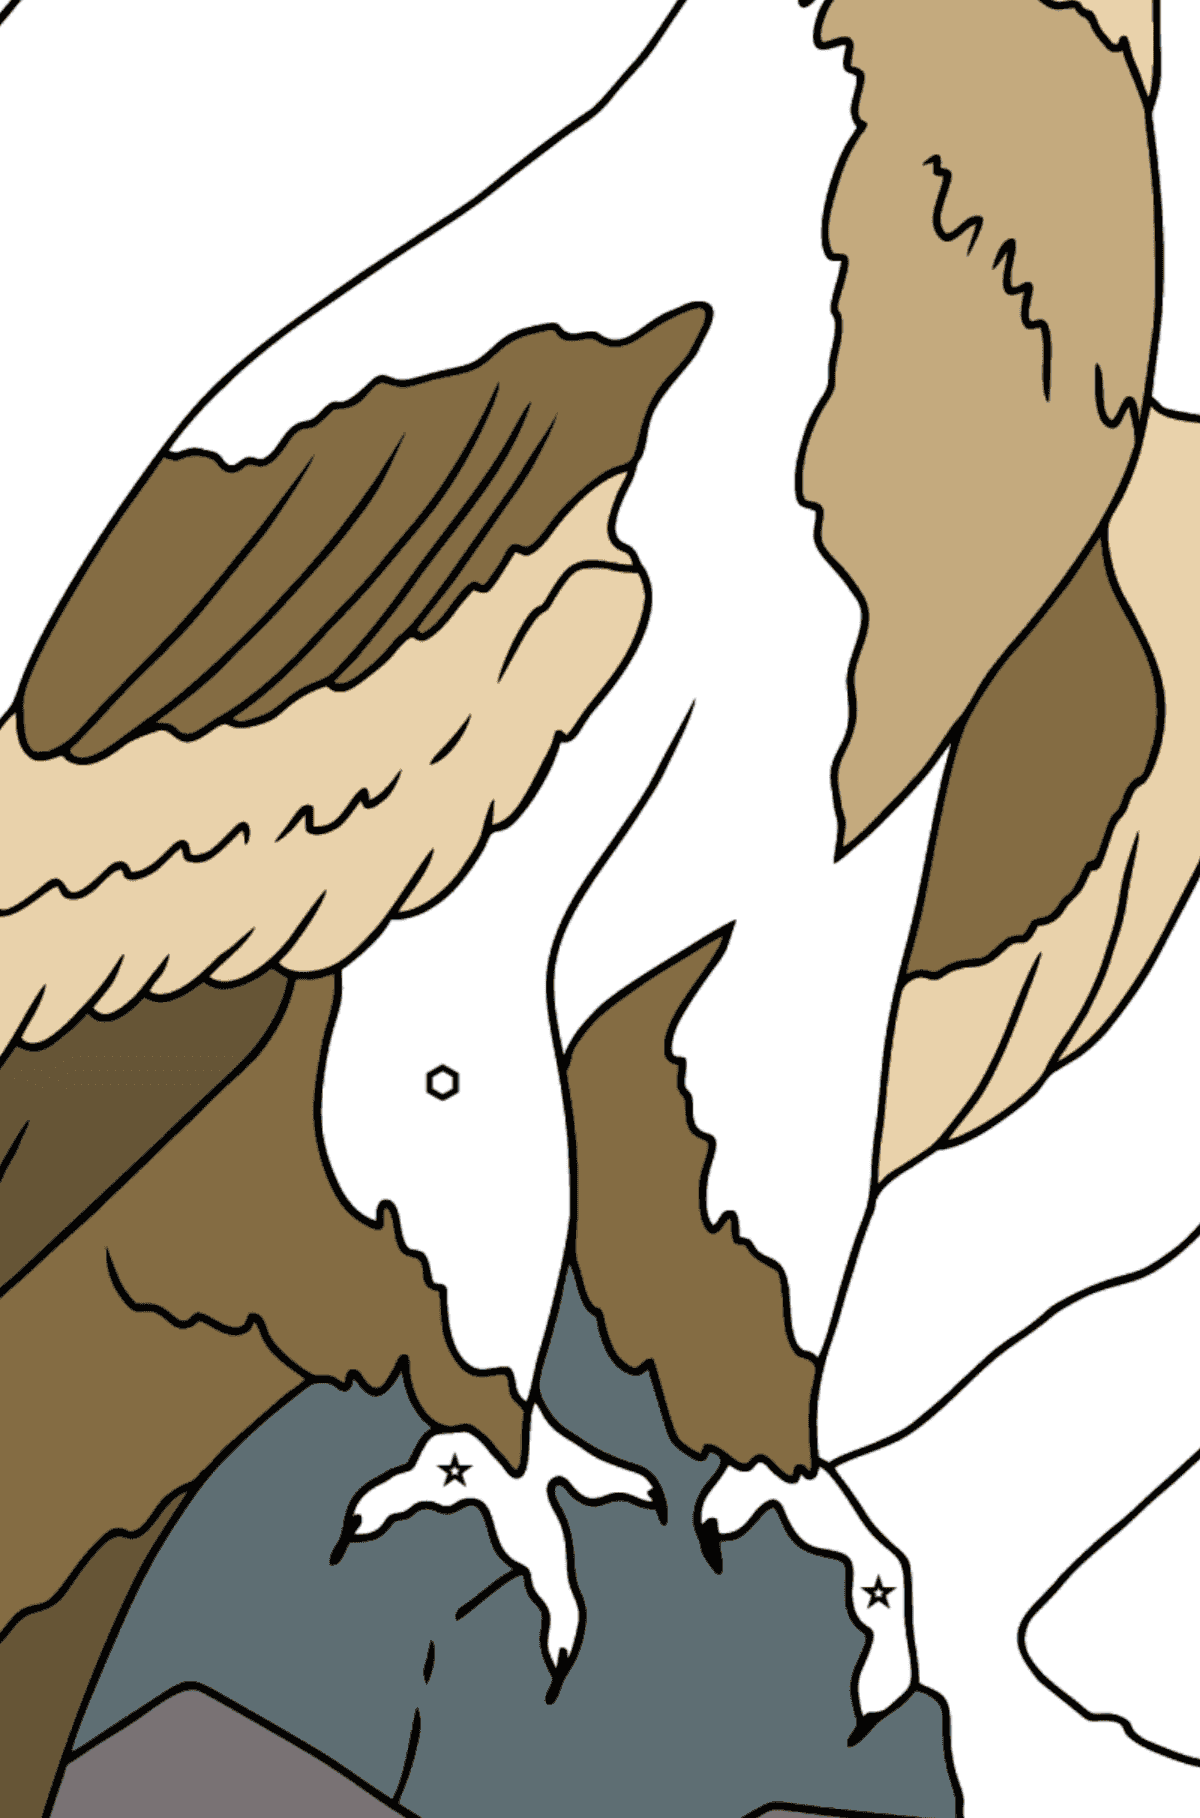 Coloring Page - An Alpine Eagle - Coloring by Geometric Shapes for Kids